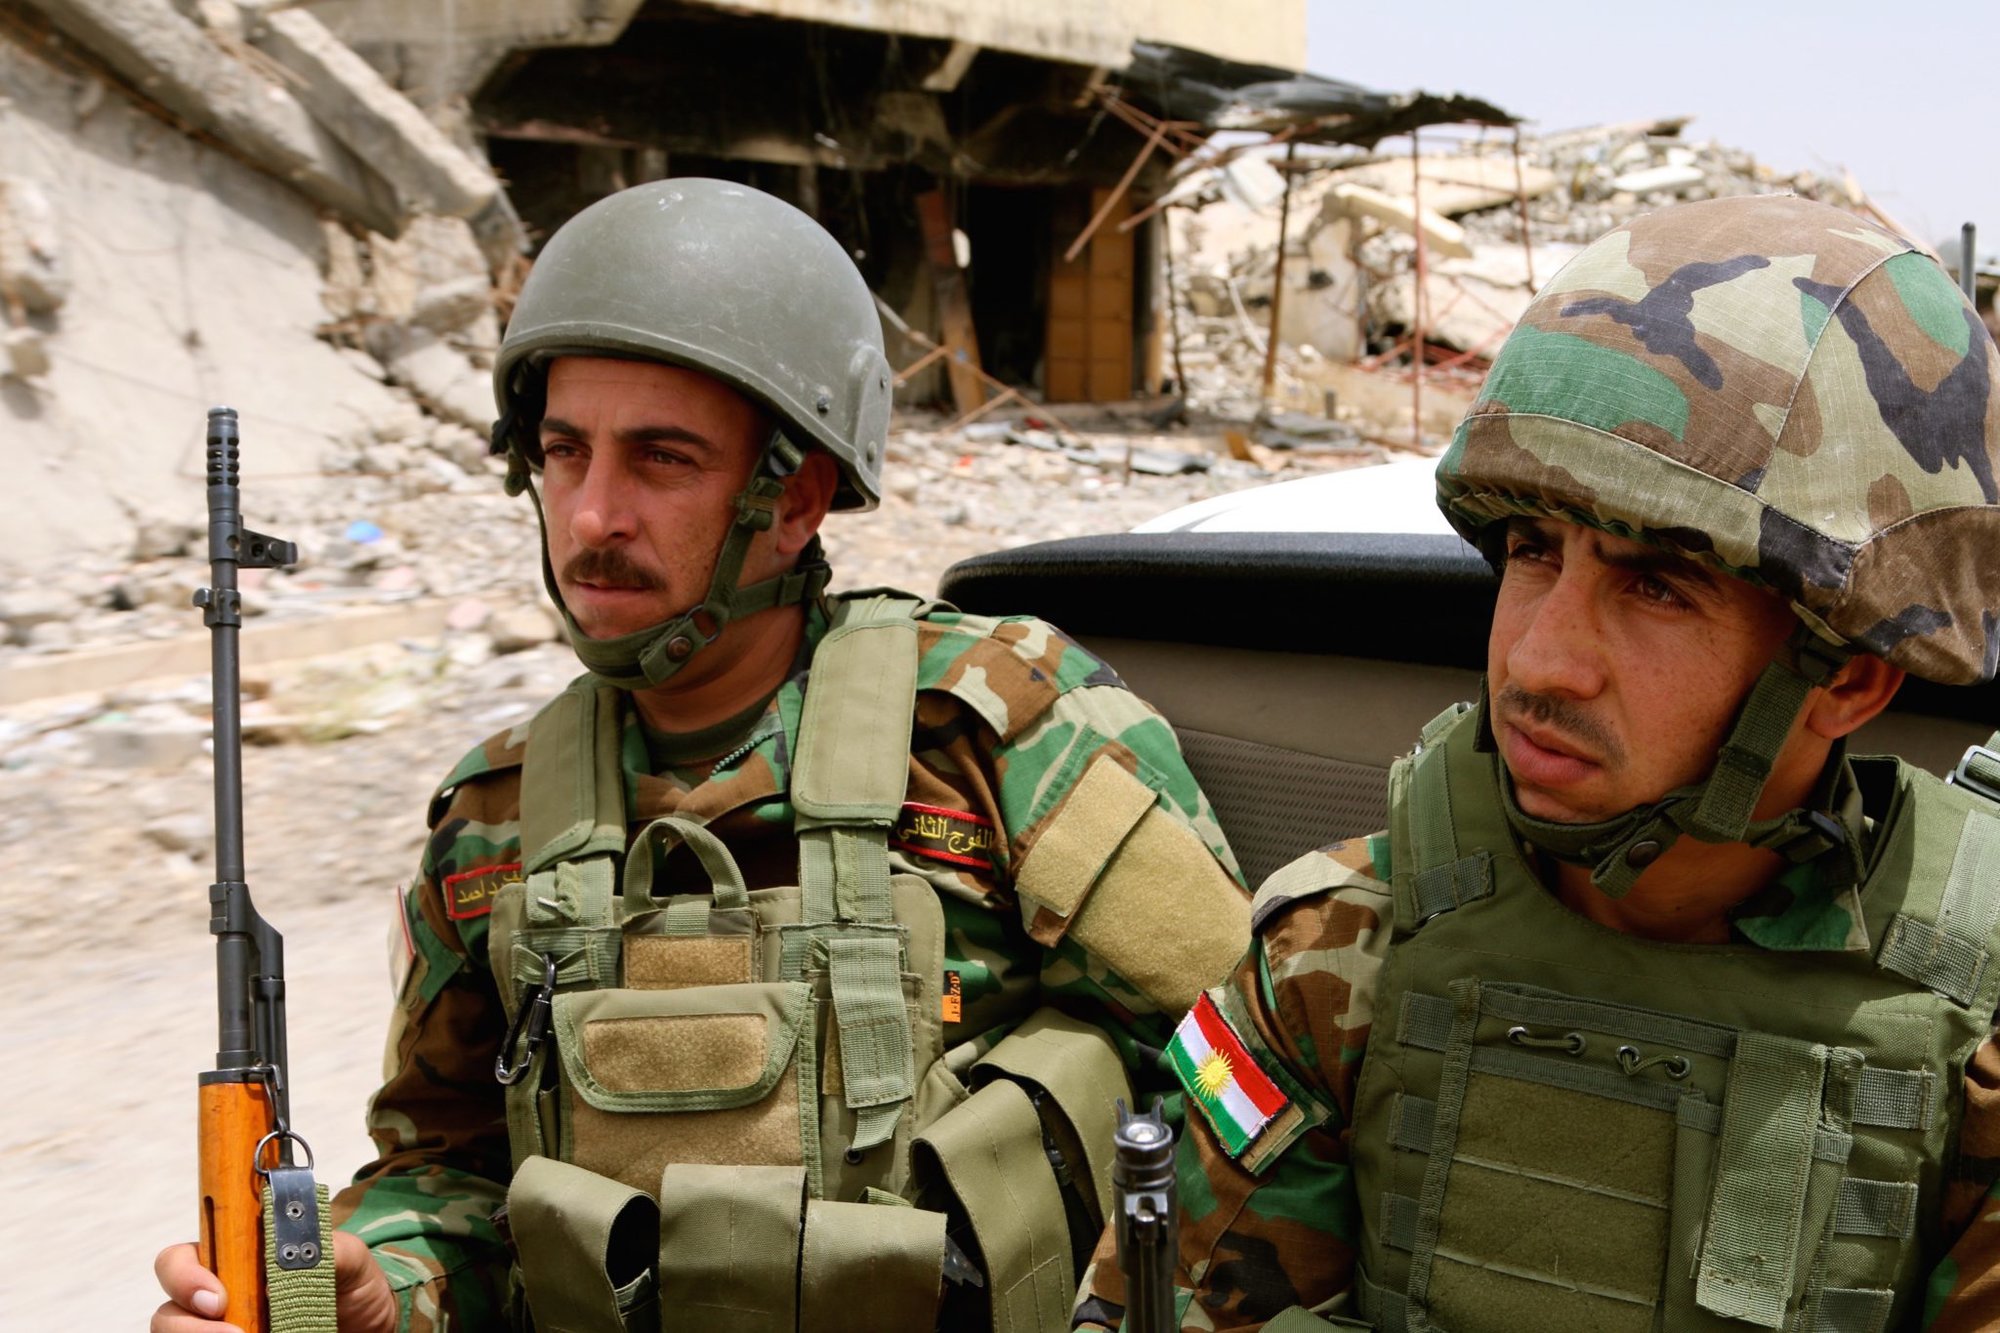 Peshmerga soldiers on patrol in Sinjar, Iraq, following the defeat of ISIS. Photo by Nolan Peterson/Coffee or Die.